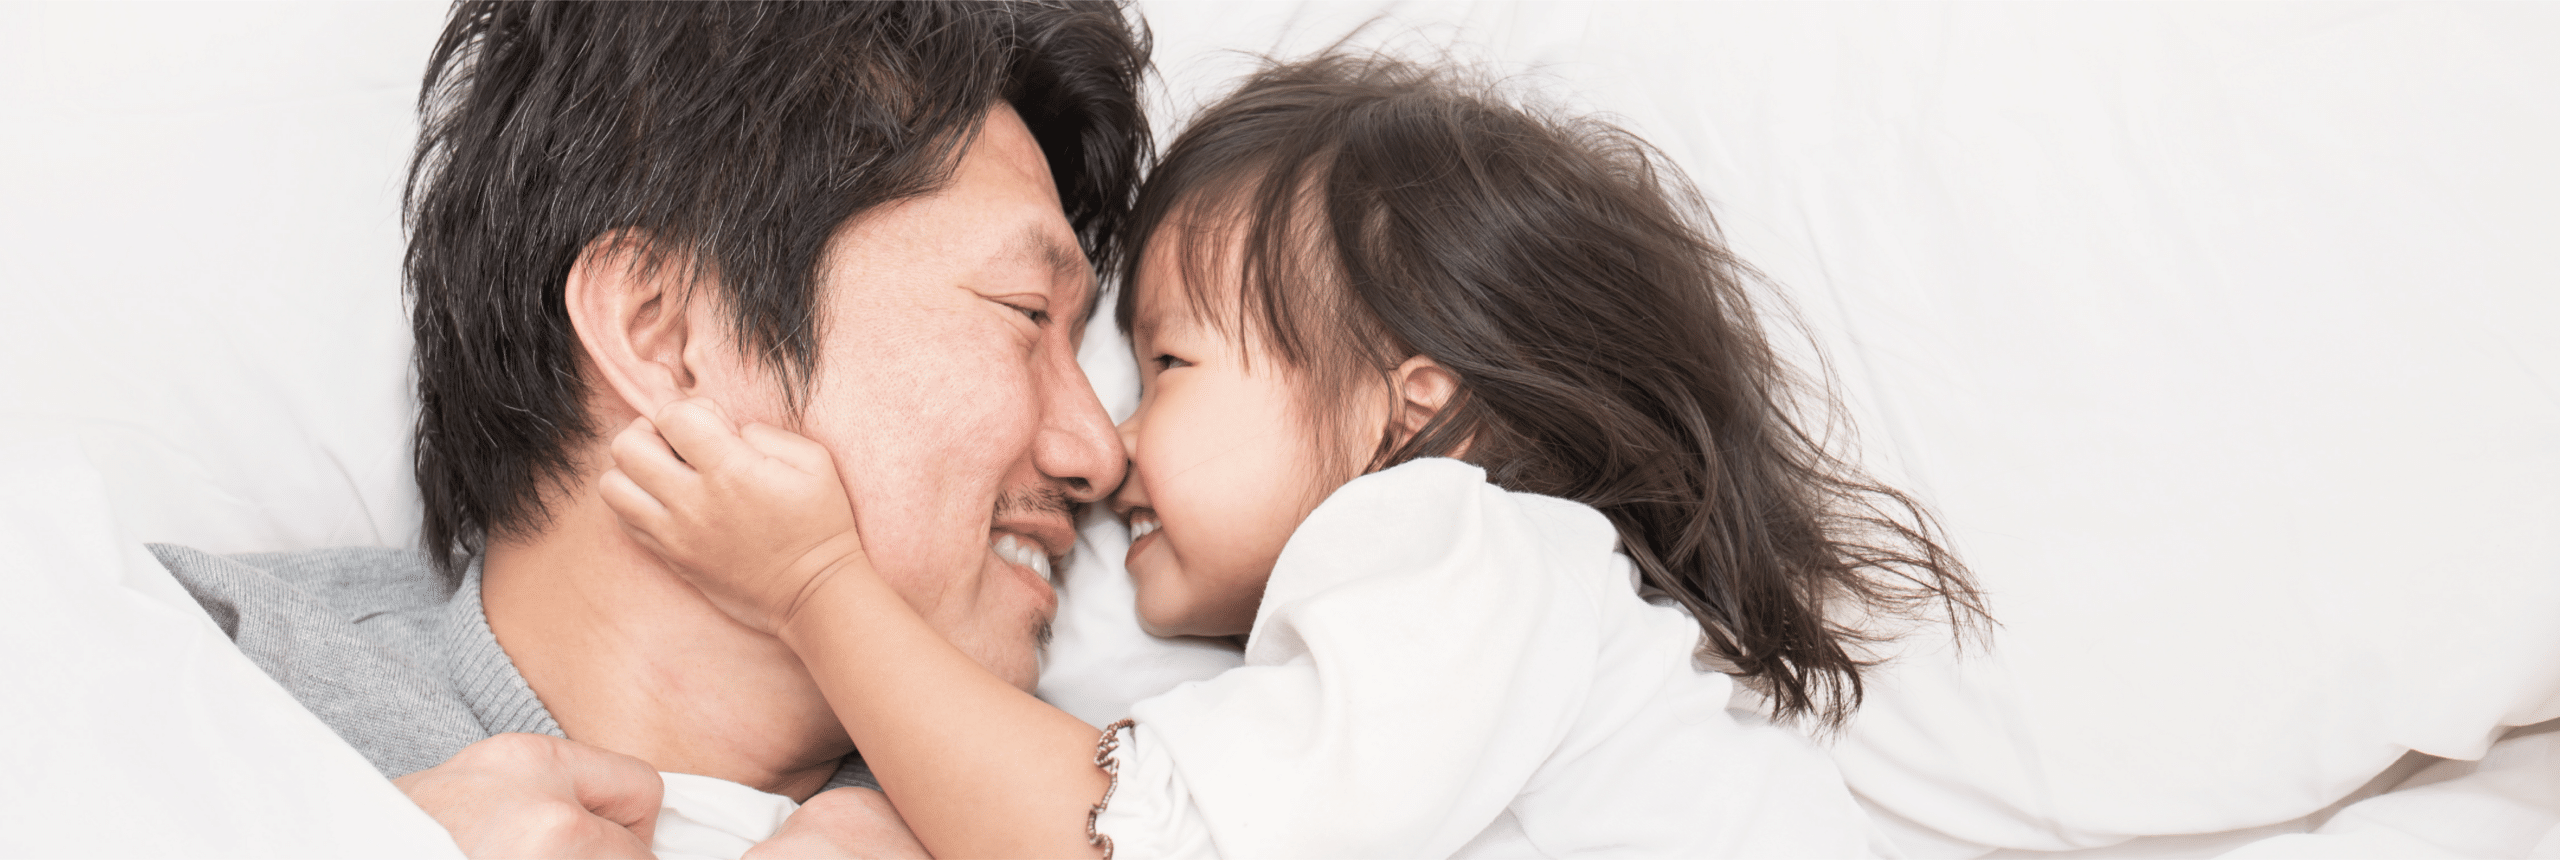 Paternal Bond: Key to Building a Close Relationship with Children